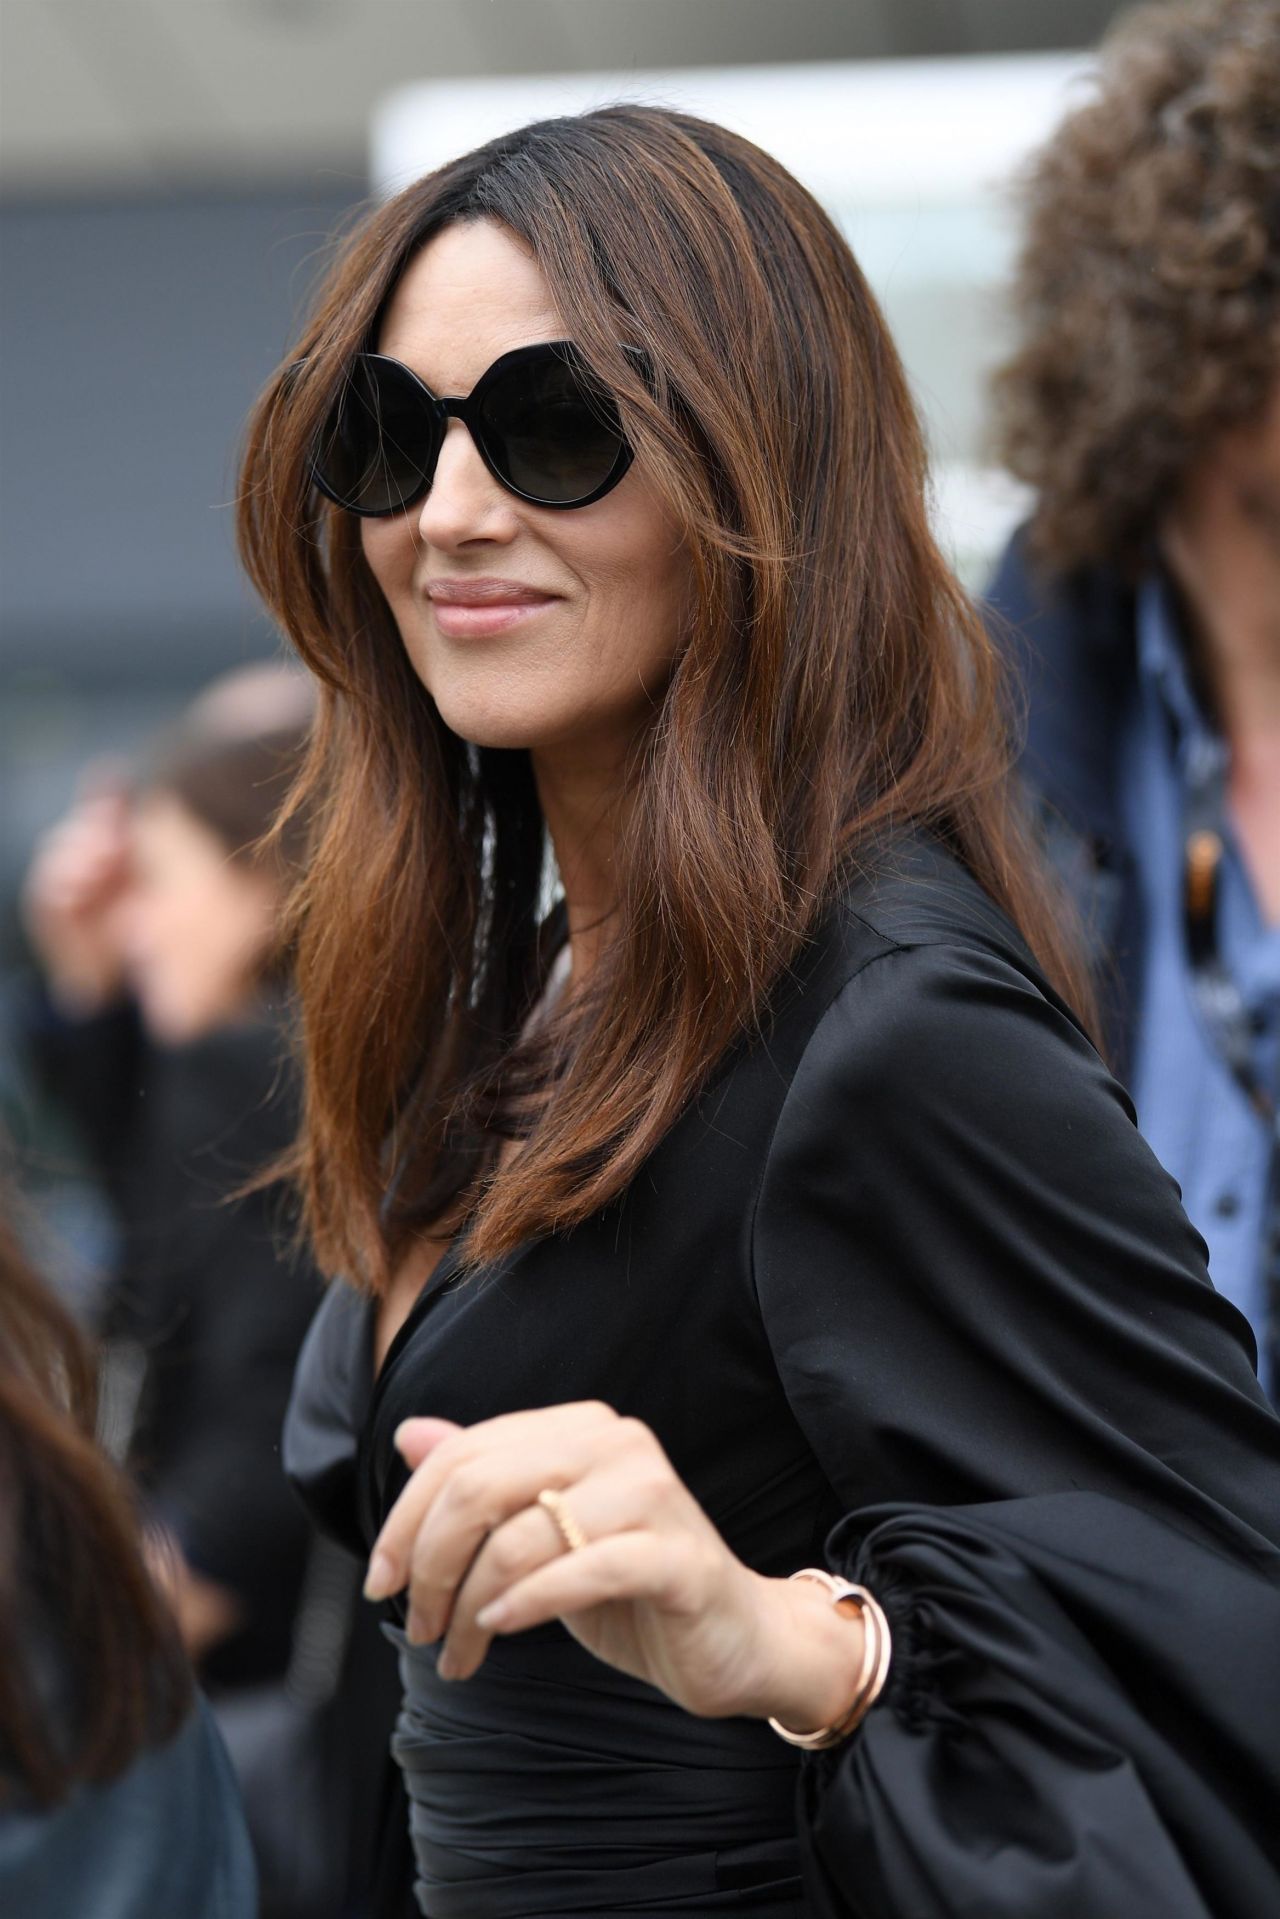 monica-bellucci-the-best-years-of-a-life-photocall-at-cannes-film-festival-10.jpg